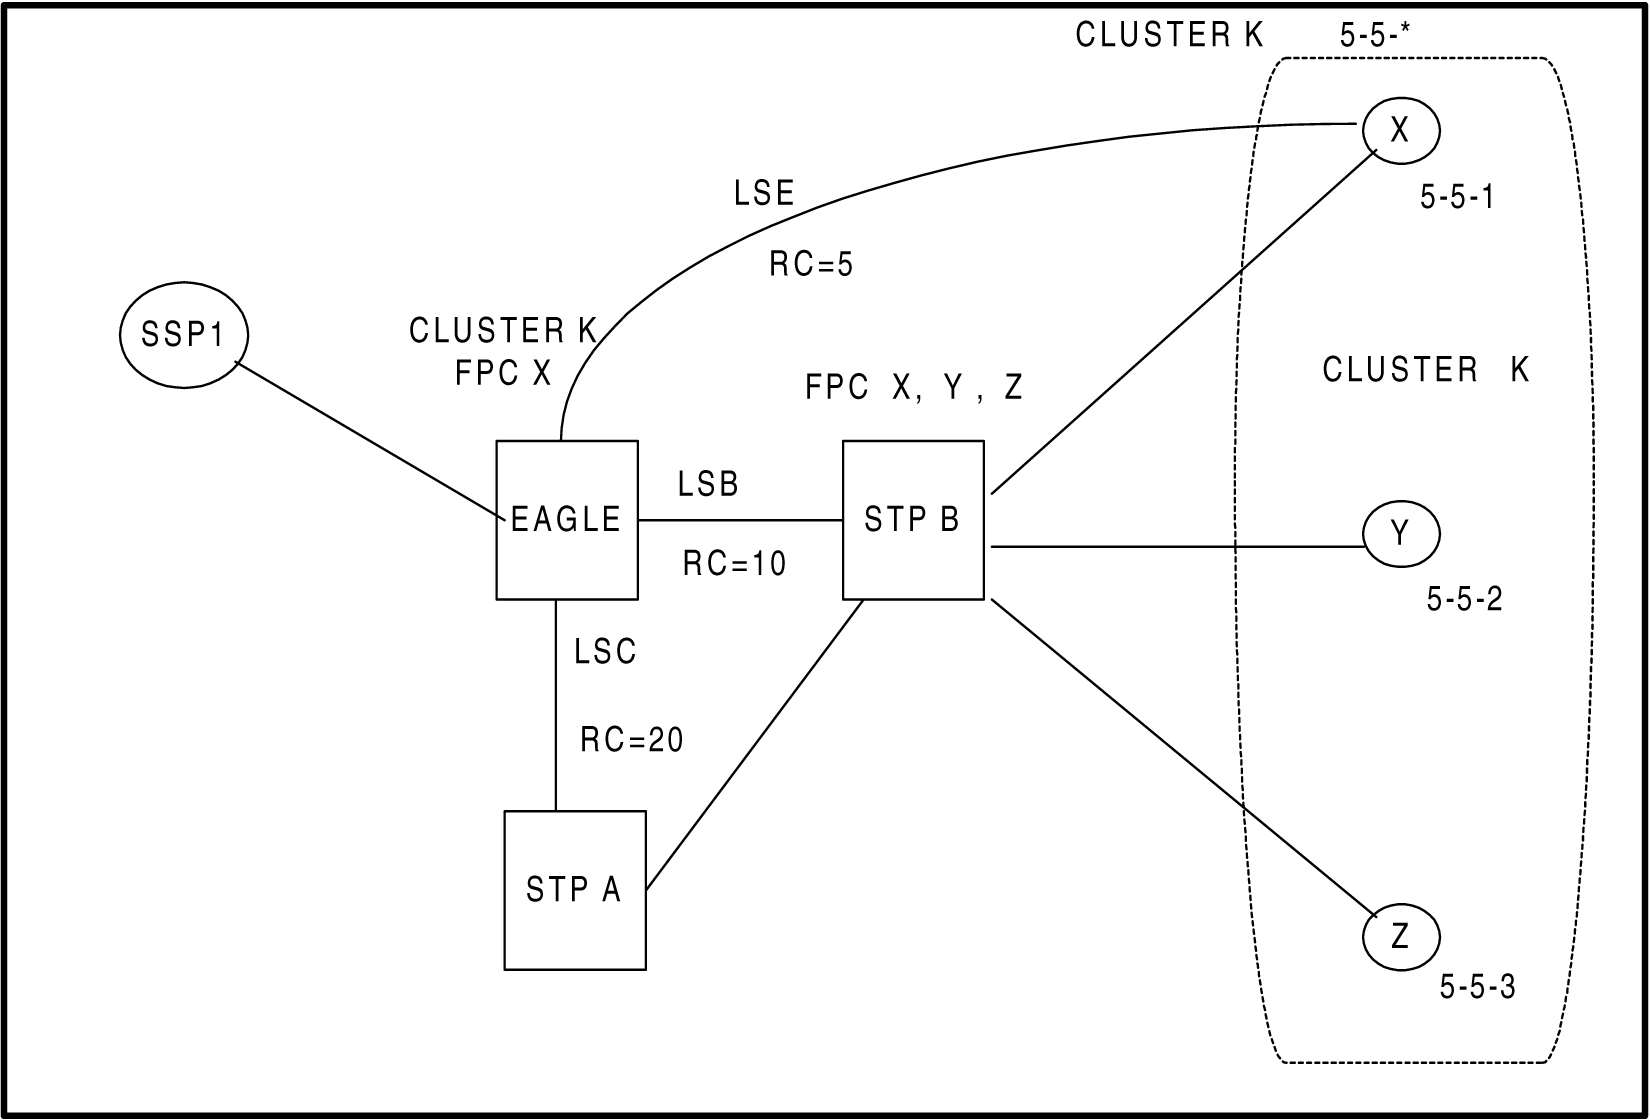 img/c_nested_cluster_routing_release_26_0_prf-fig4.jpg